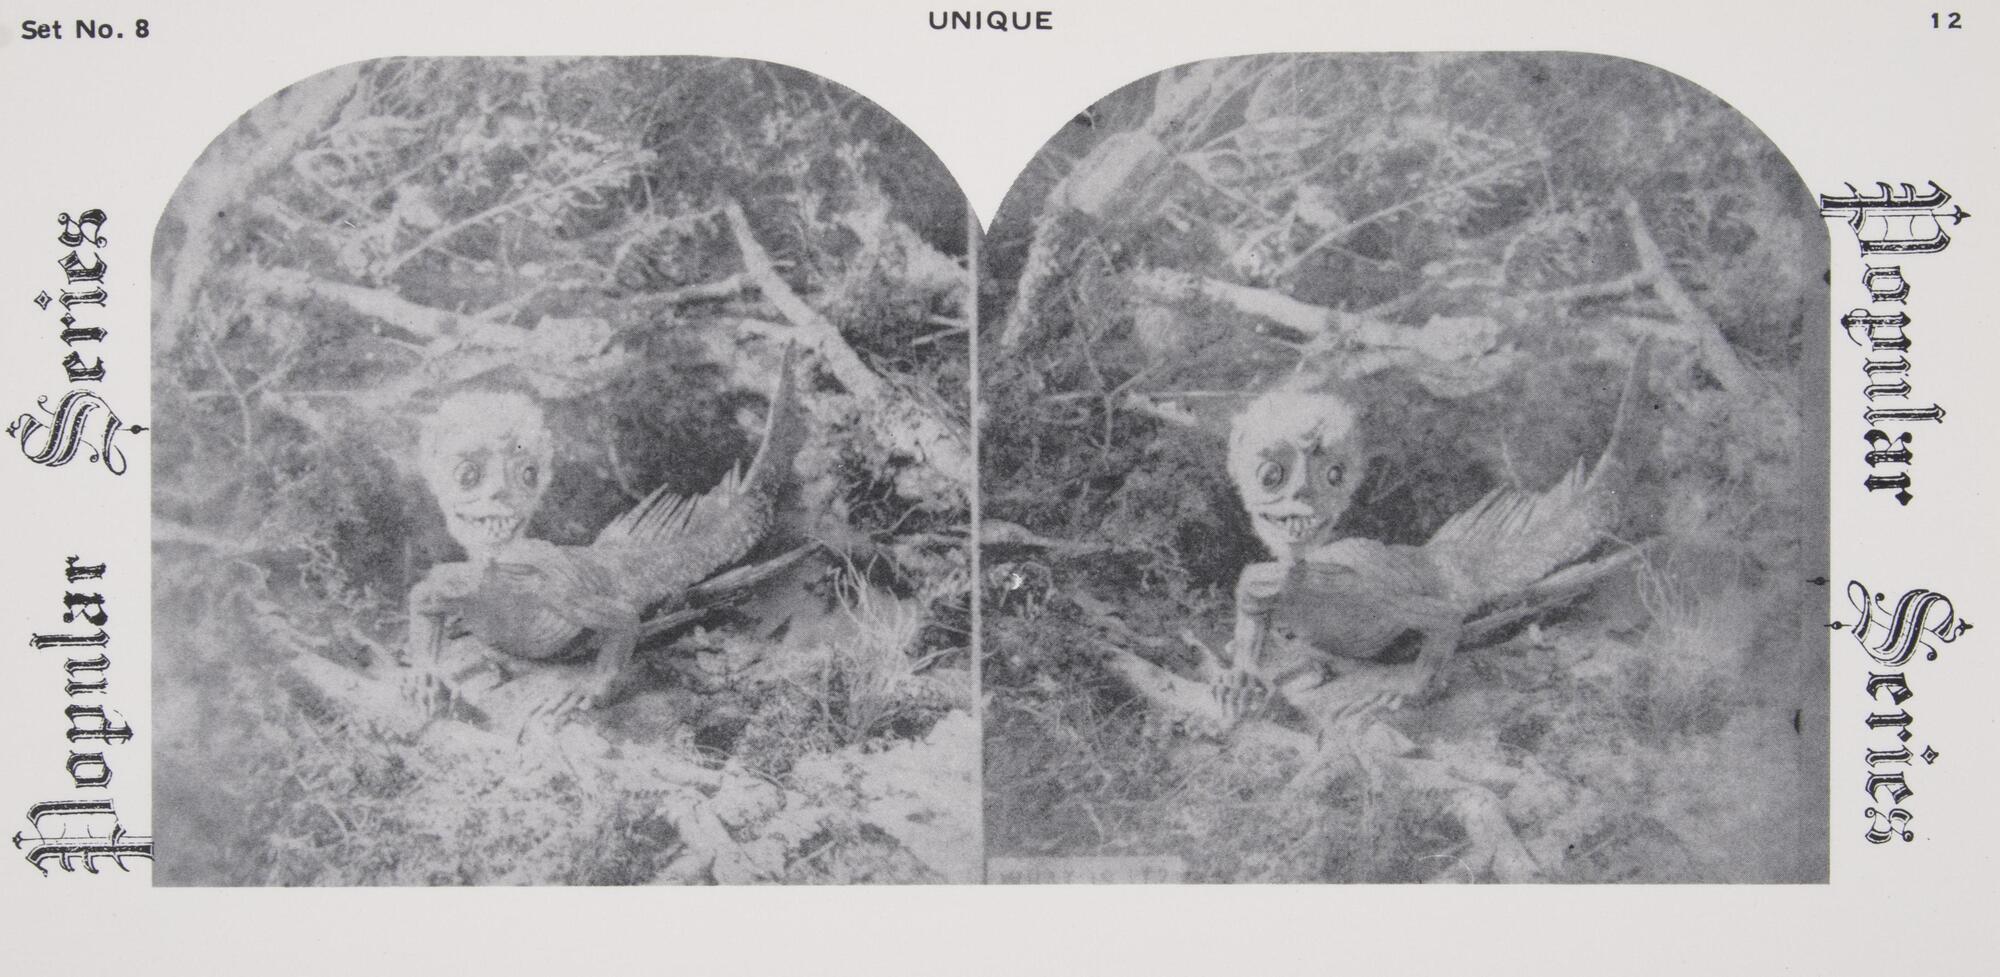 This black and white stereoscopic image features two images of a creature with an iguana’s body and an alien/skull/human head. It is surrounded by the text: Set No. 8; Underwood &amp; Underwood, Publishers, Unique; Popular Series.